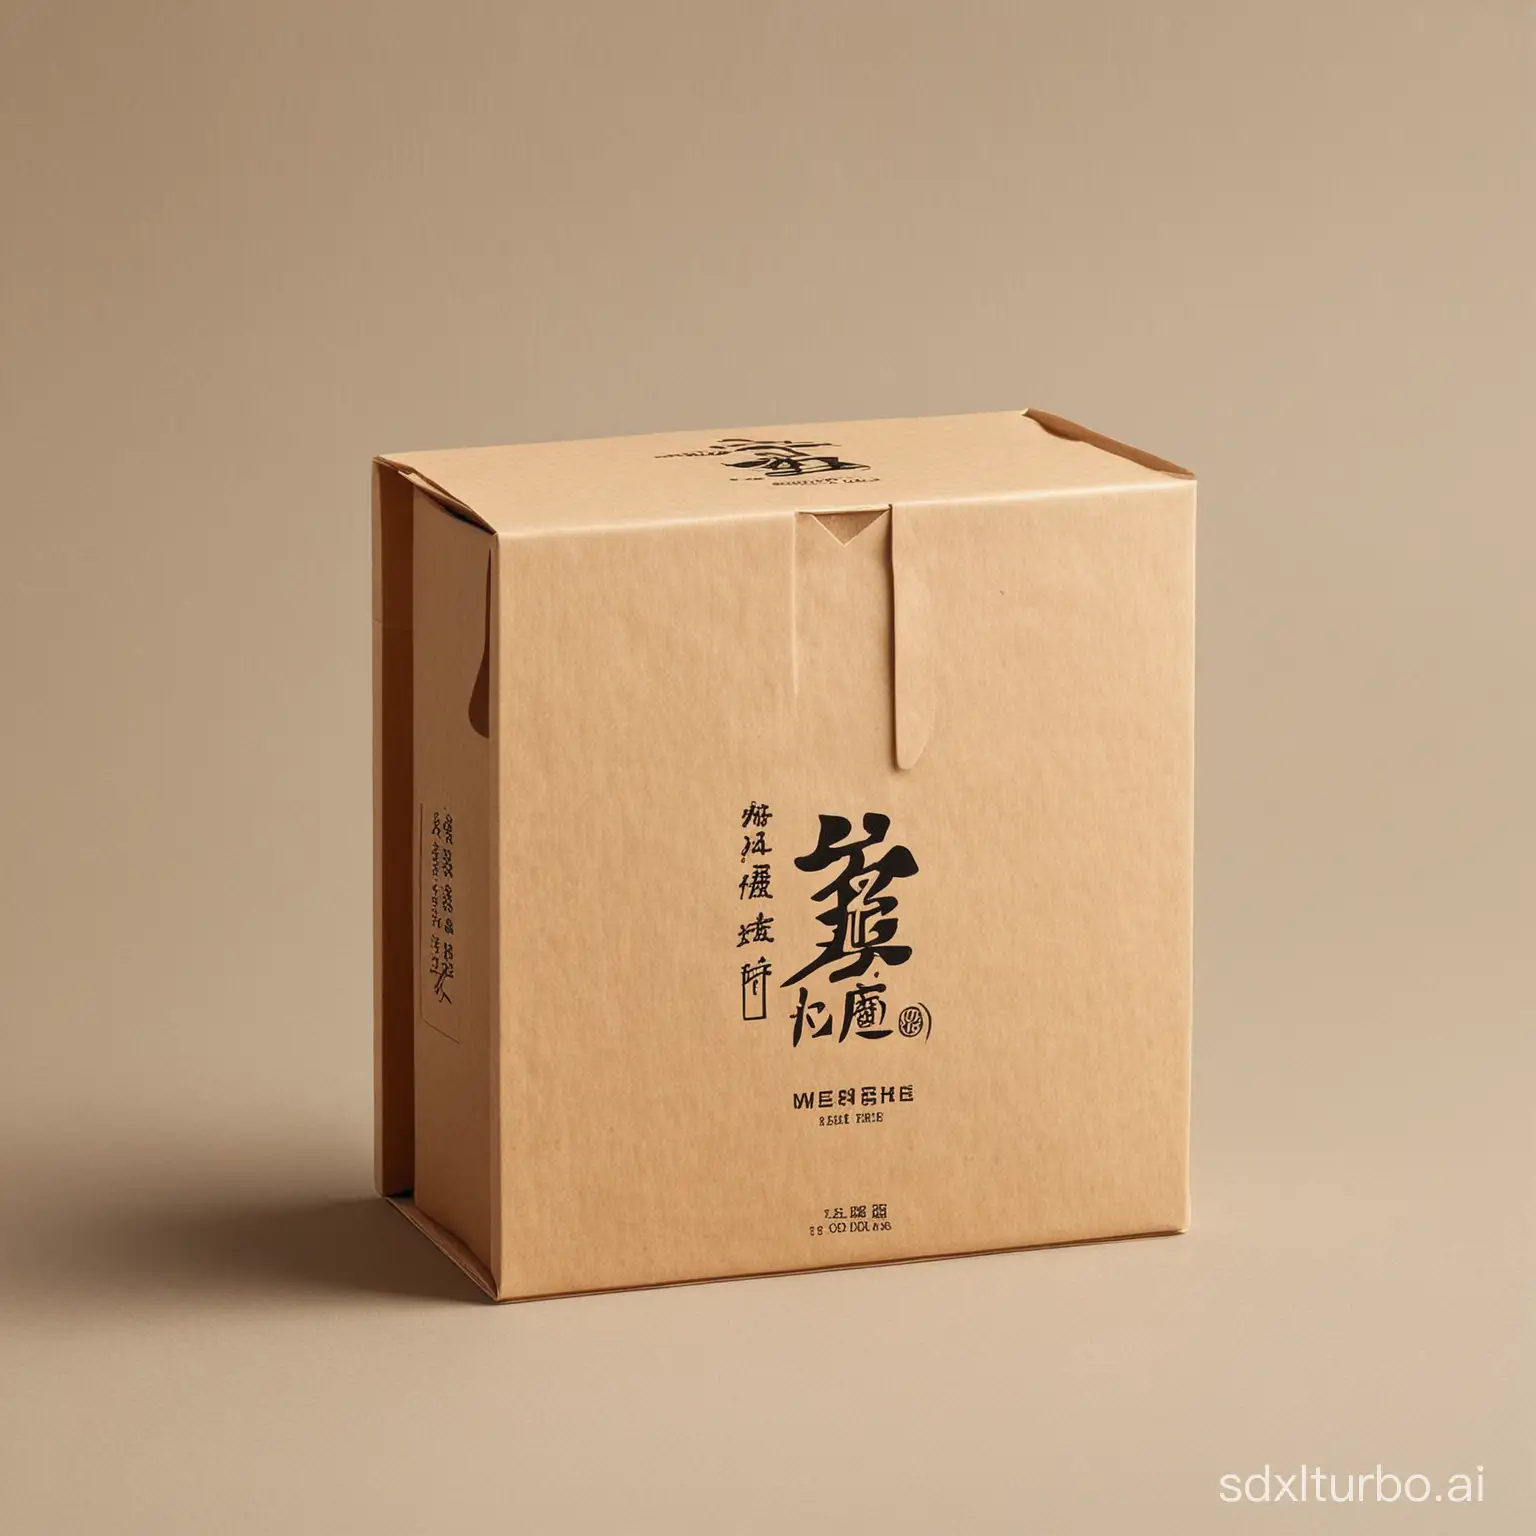 Elegant-Chinese-Tea-Packaging-Minimalistic-Beauty-in-Traditional-Design